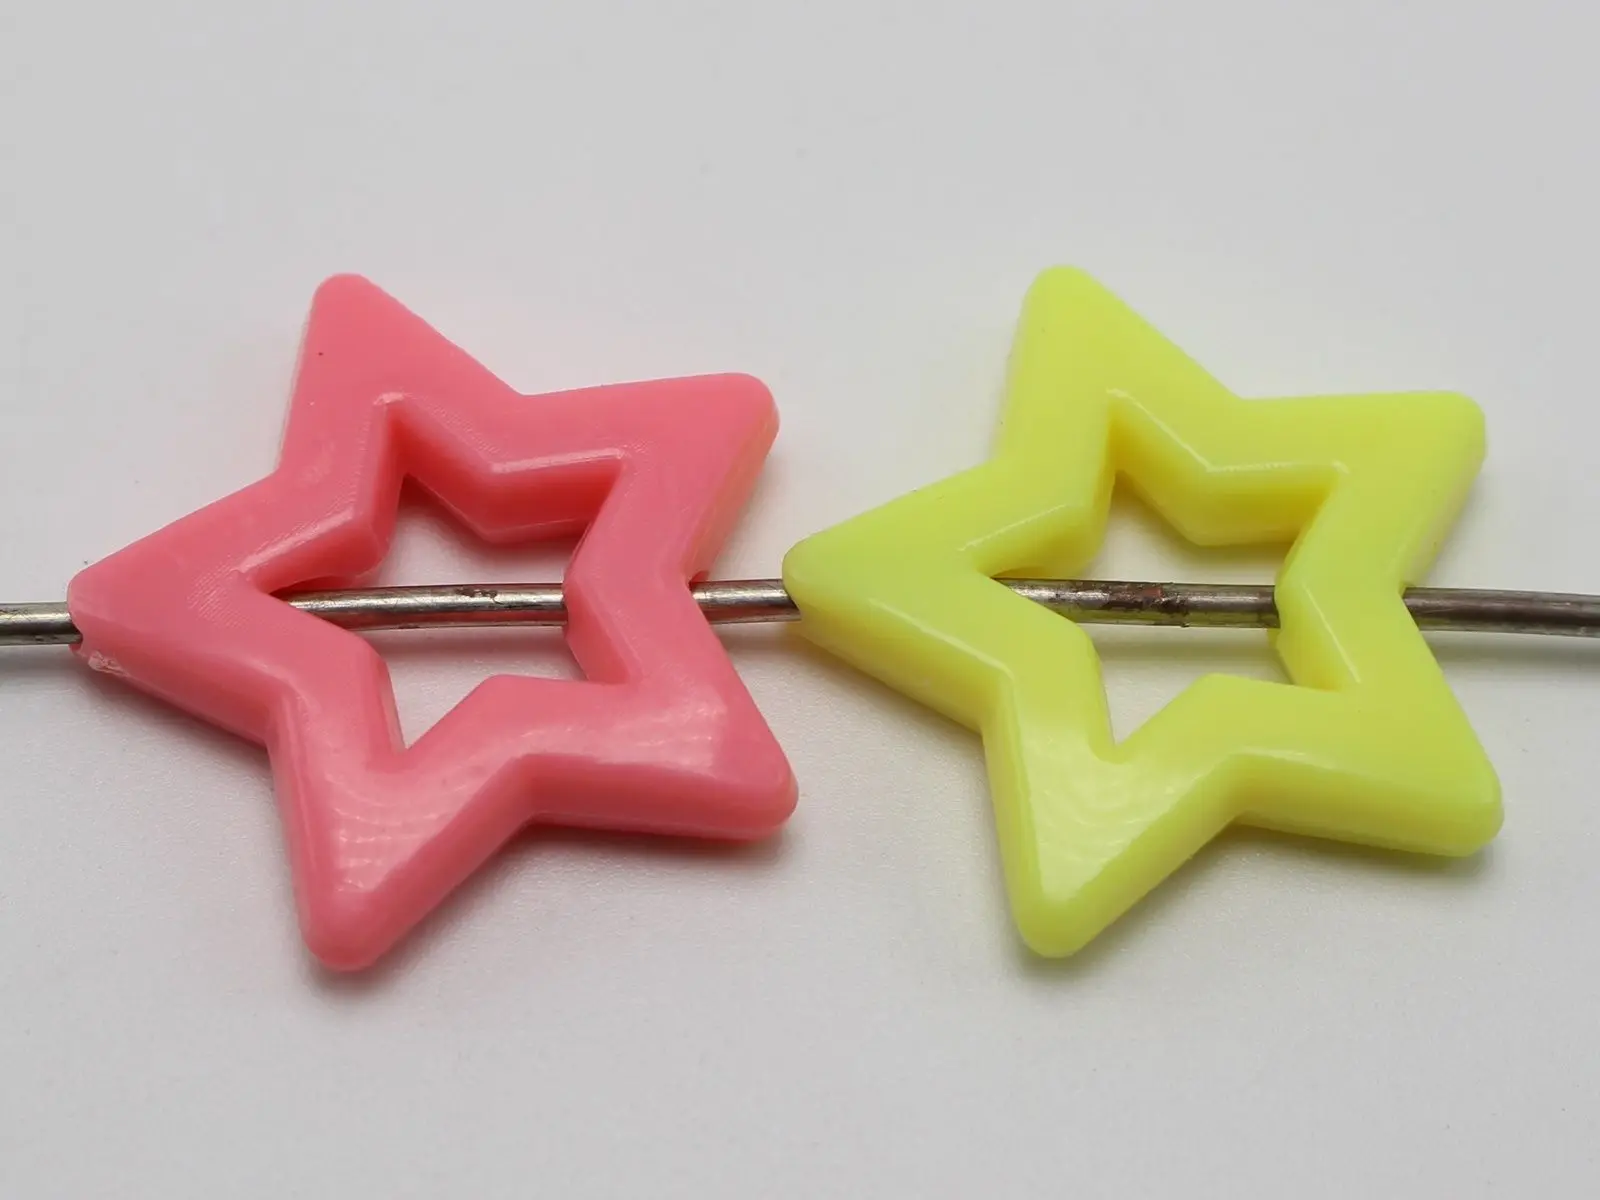 30 Mixed Pastel Color Acrylic Hollow Star Beads 27mm Jewelry Making